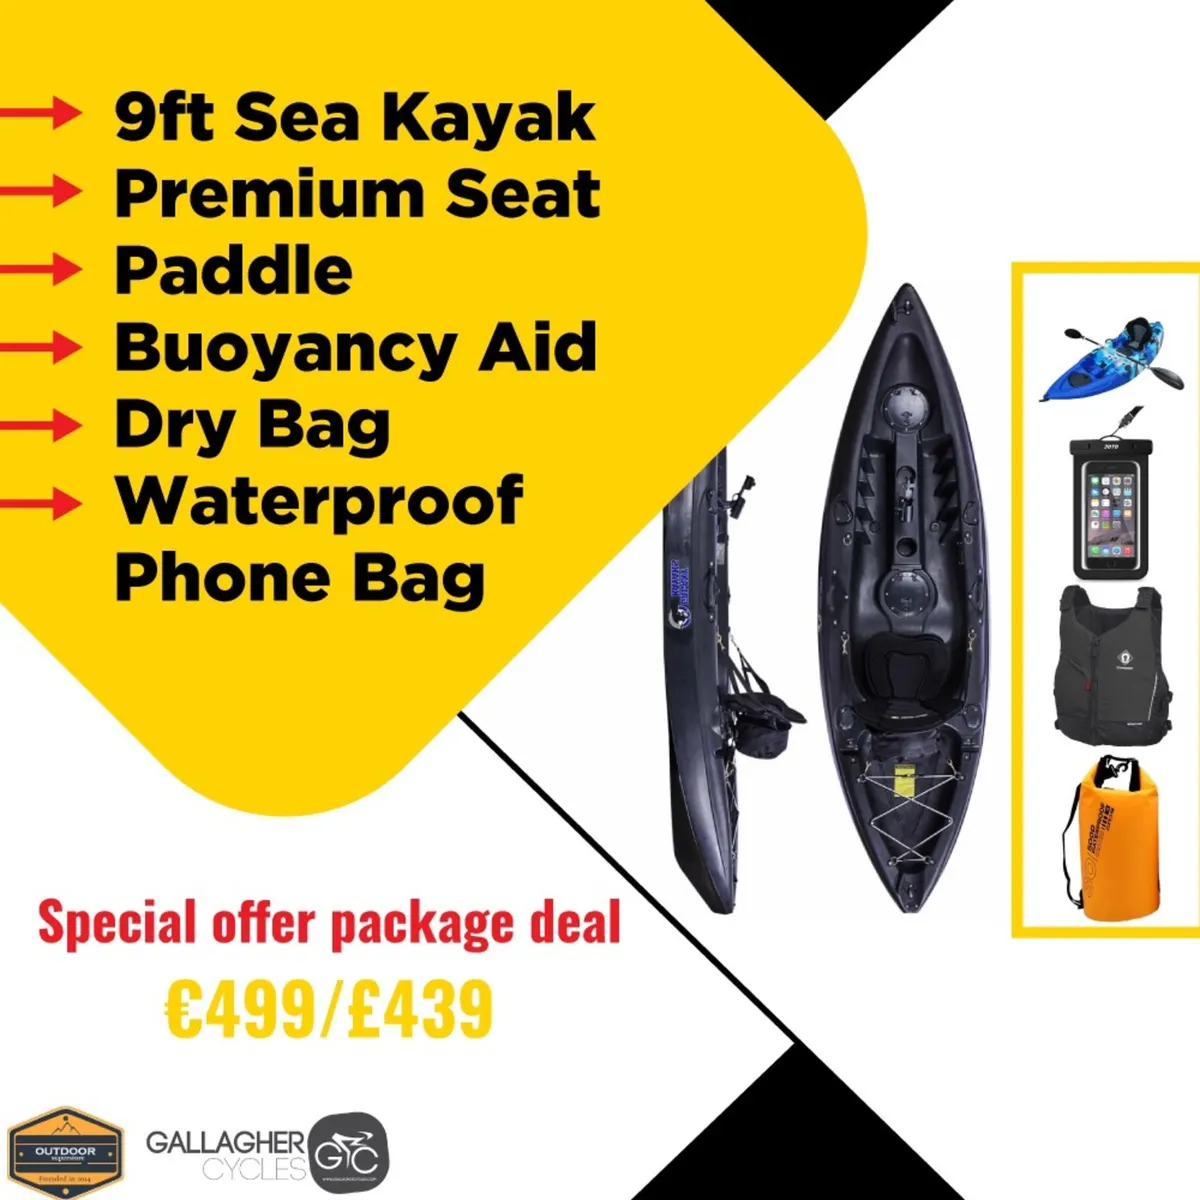 New 9ft Sea Kayak Package Offer